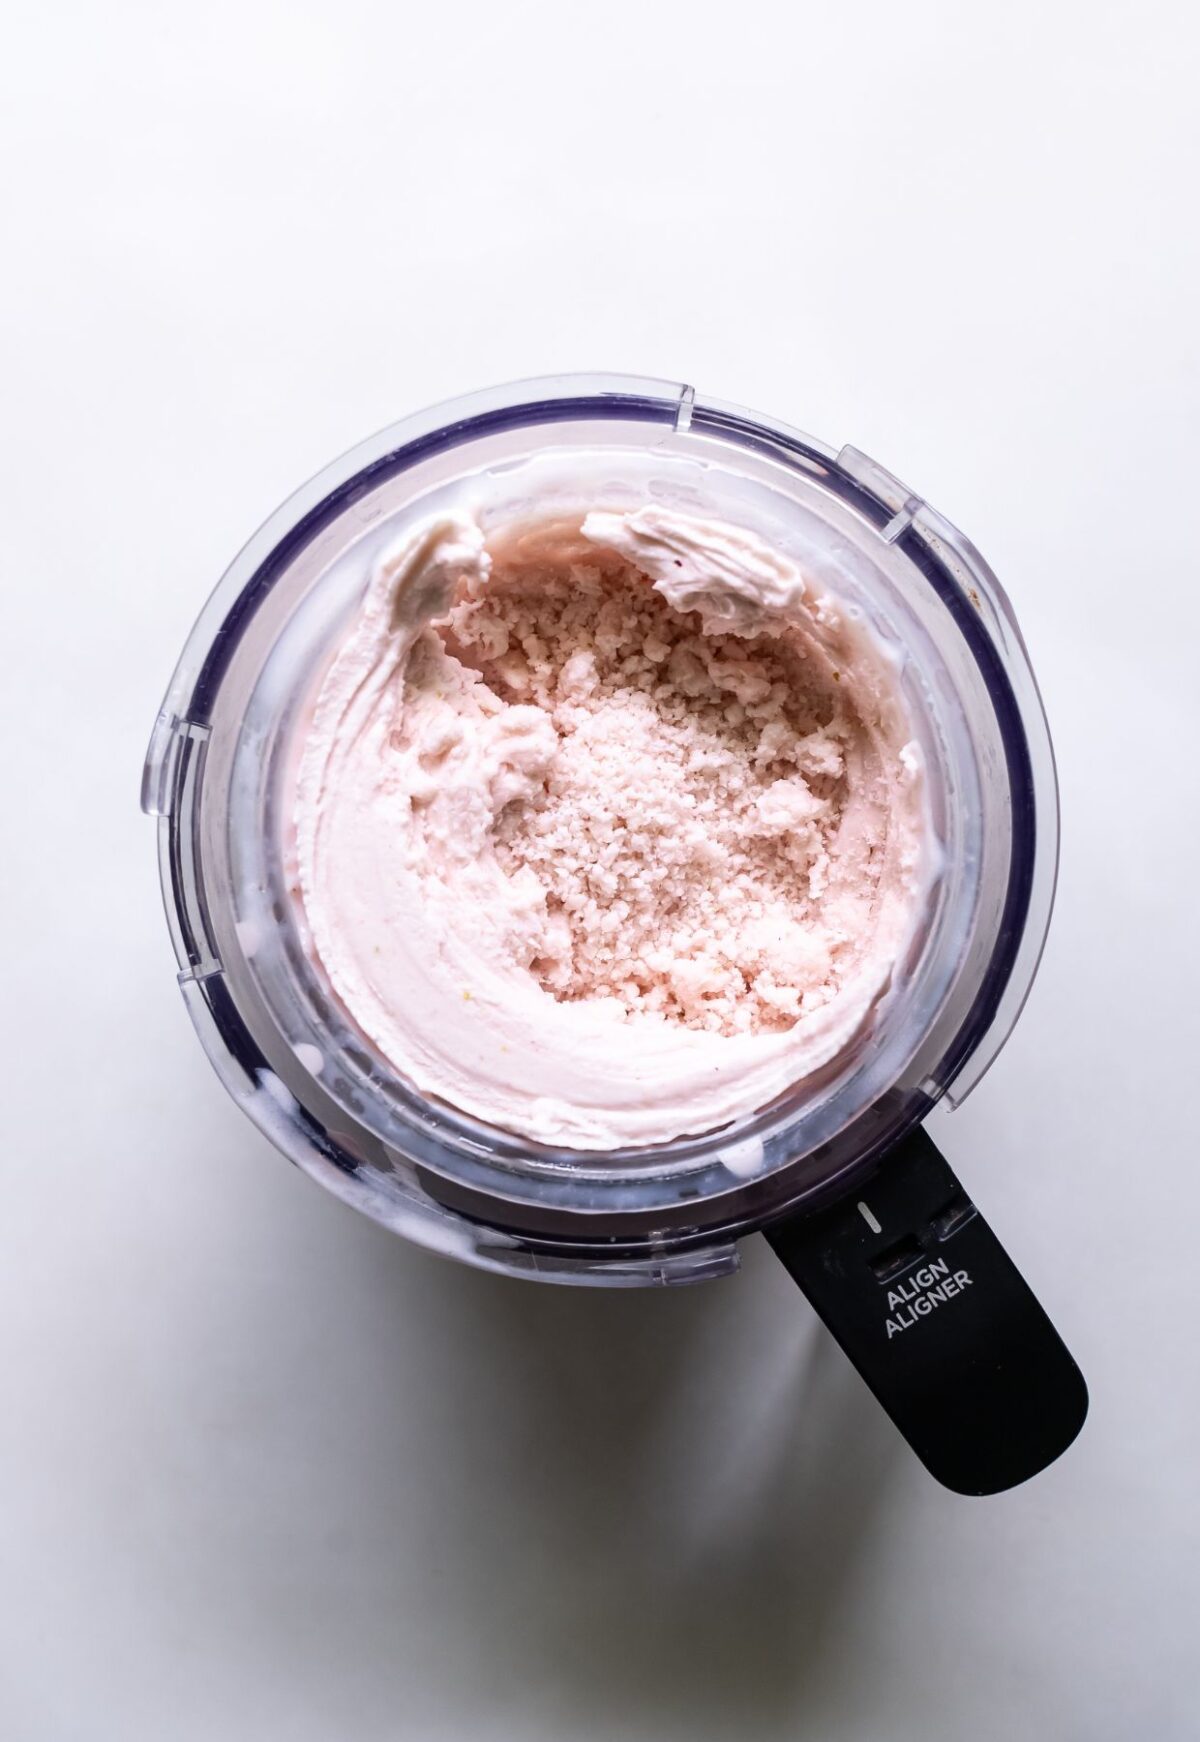 A top-down view of a pale pink creamy substance in a food processor against a white background.